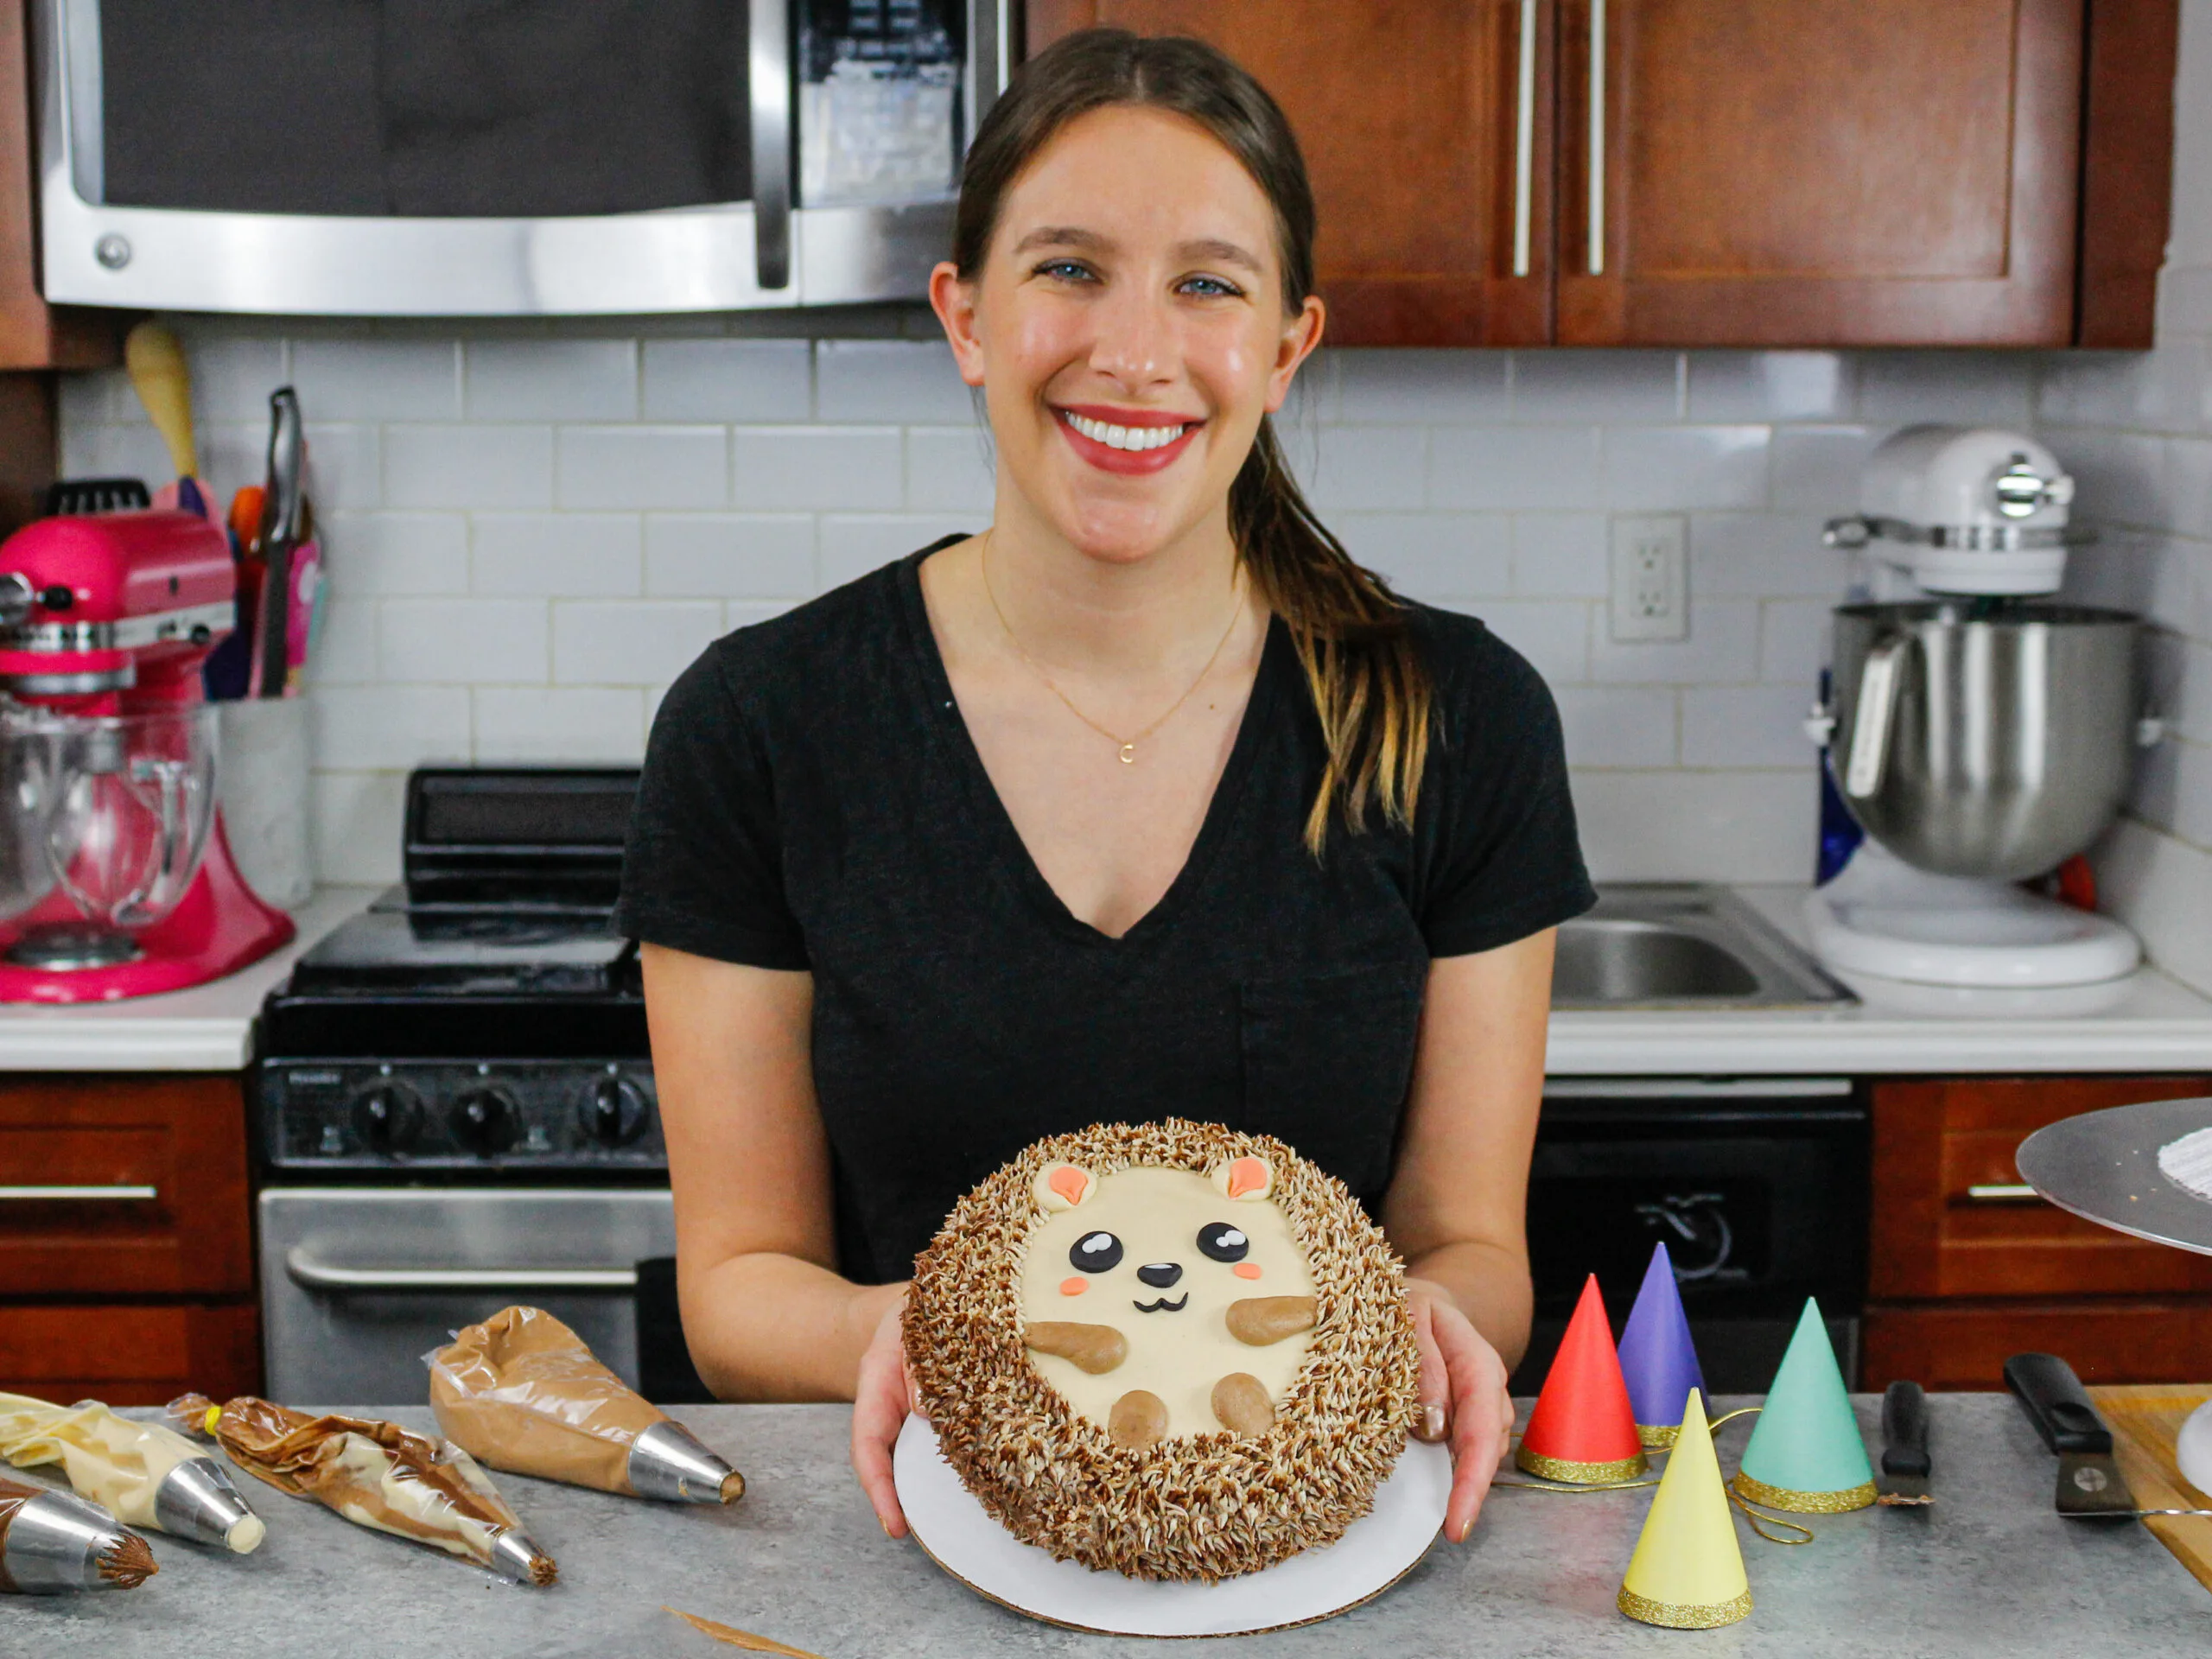 image of chelsey white of chelsweets with an adorable little hedgehog cake she made as part of her animal cake series